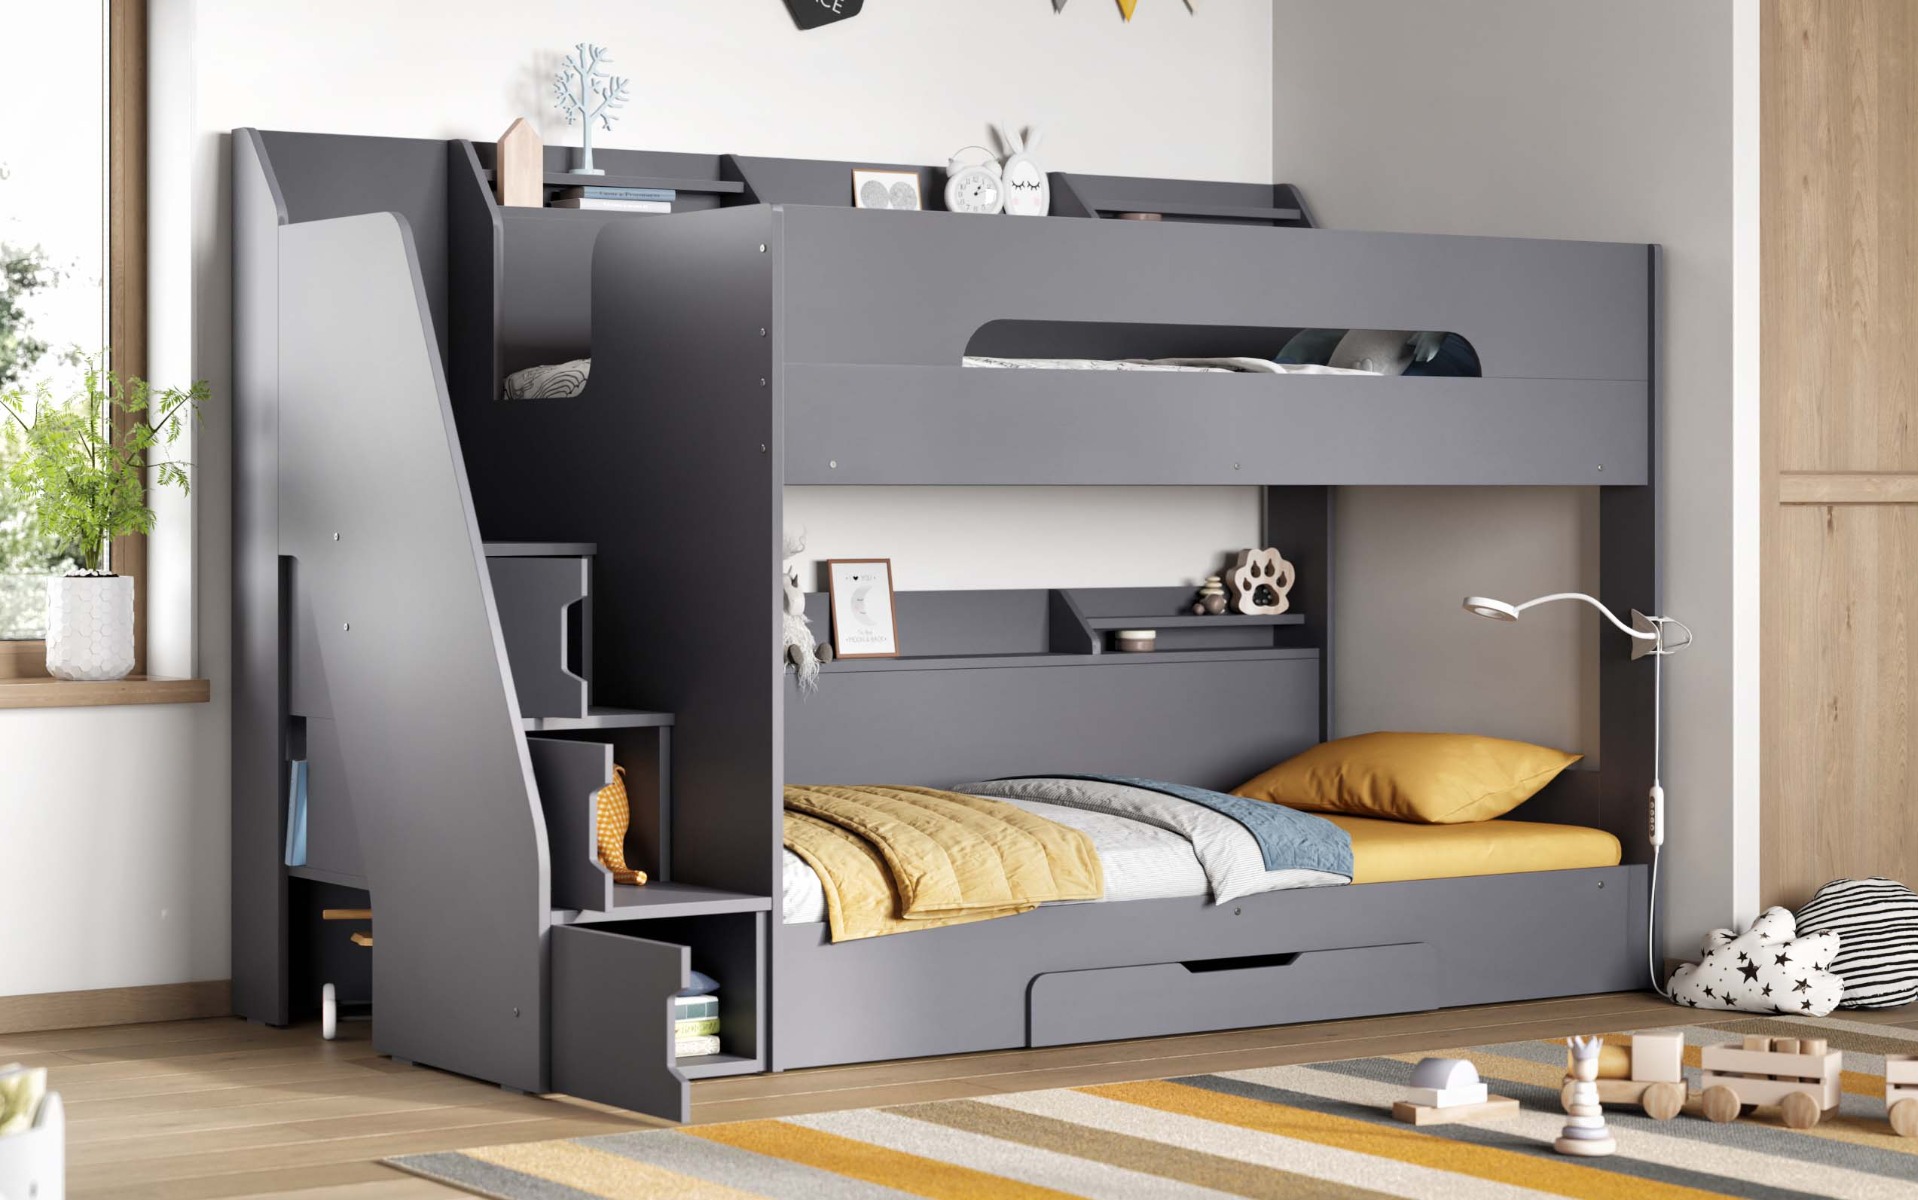 Flair Slick Staircase Bunk Bed Grey With Storage